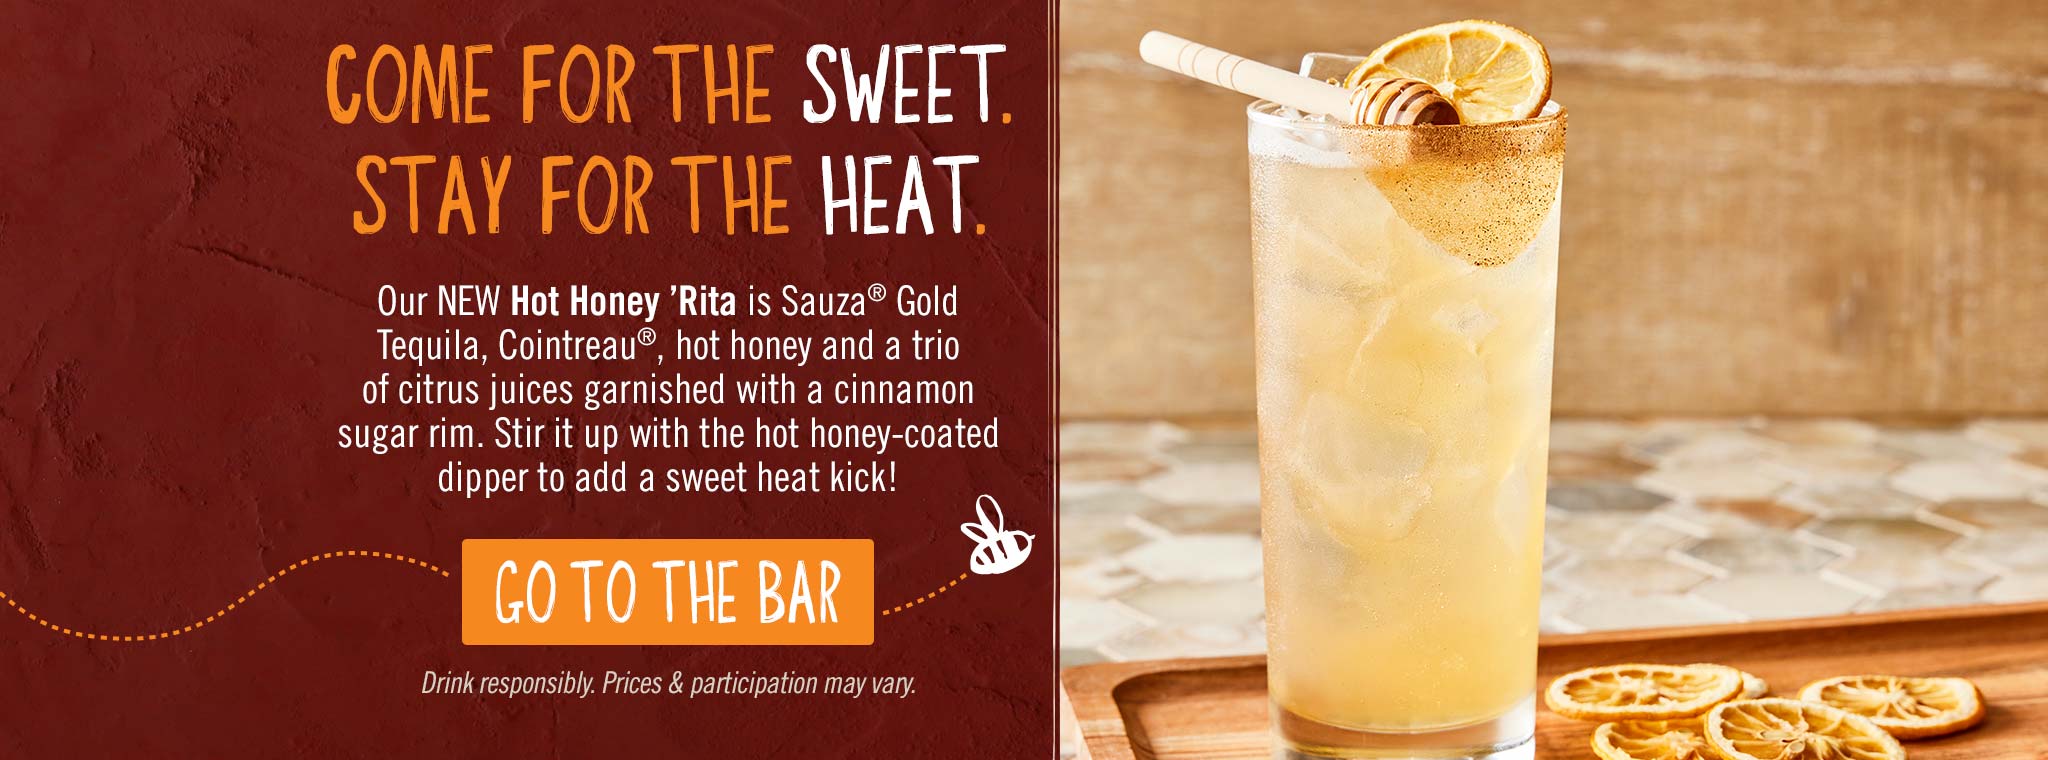 Come For The Sweet. Stay For The Heat. New Hot Honey 'Rita. GO TO THE BAR